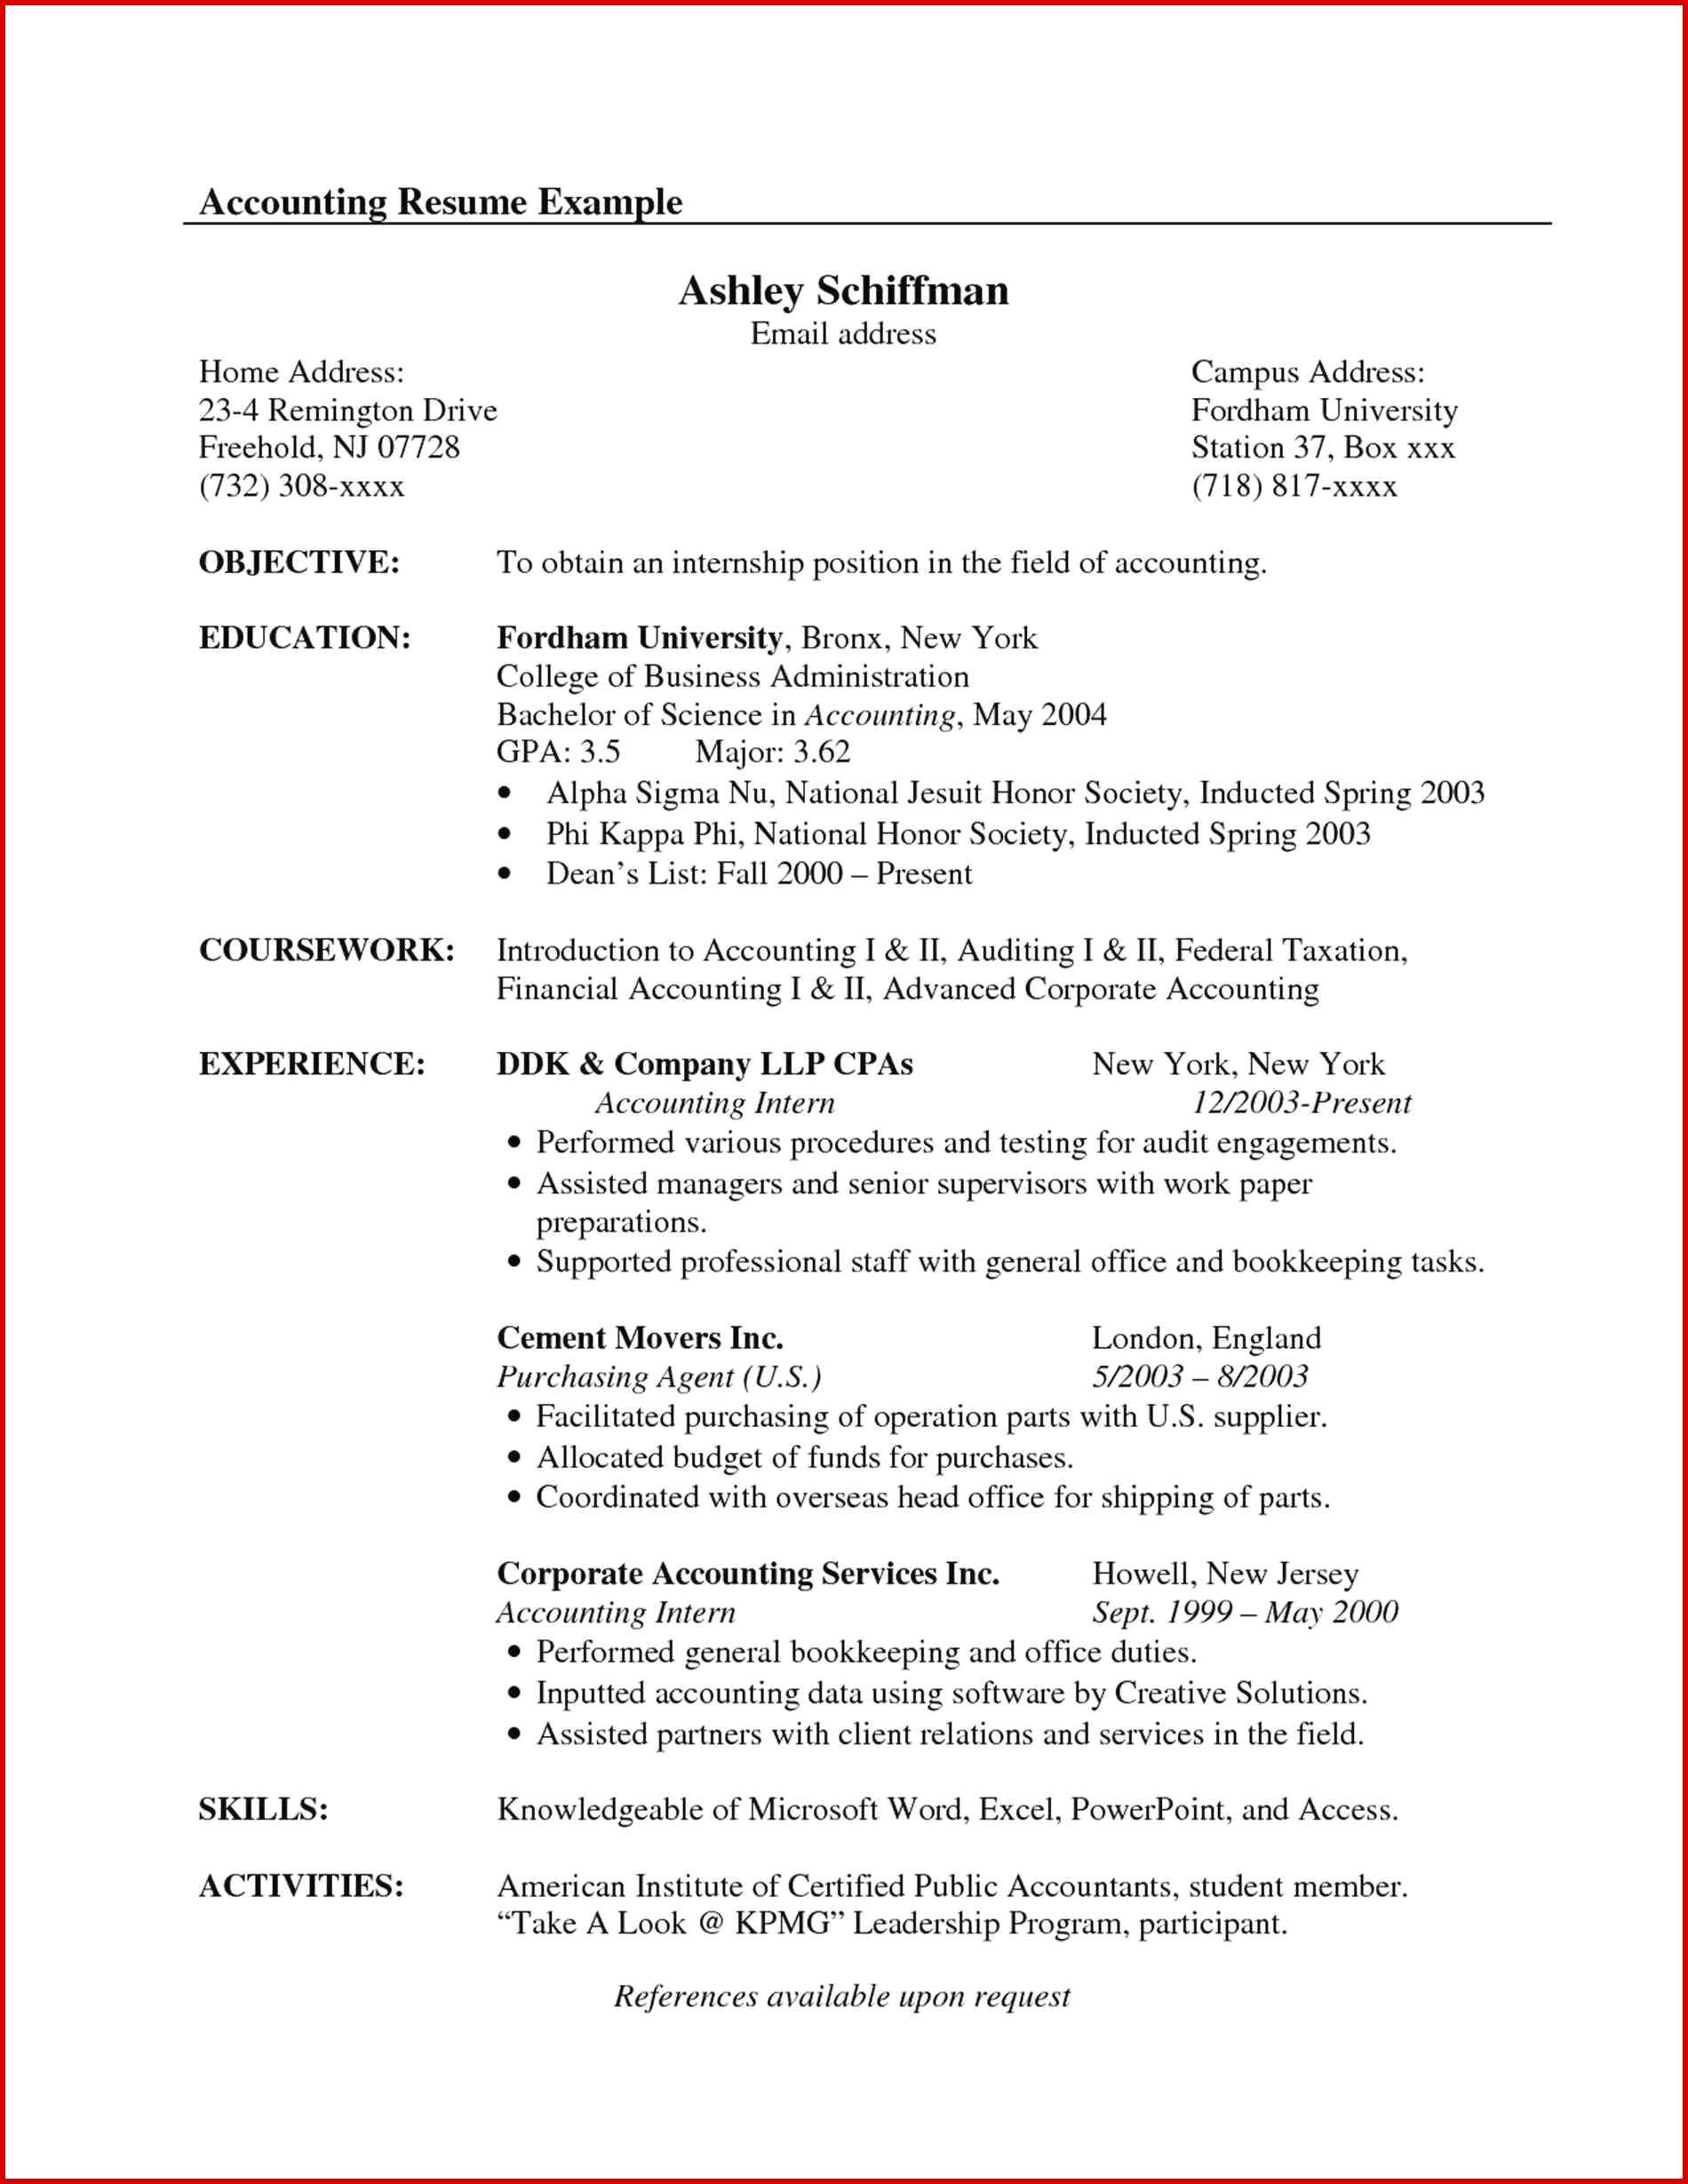 Resume Objective Example Accounting Certifications Best Of Objective Resume Samples Career 20 Accountant resume objective example|wikiresume.com